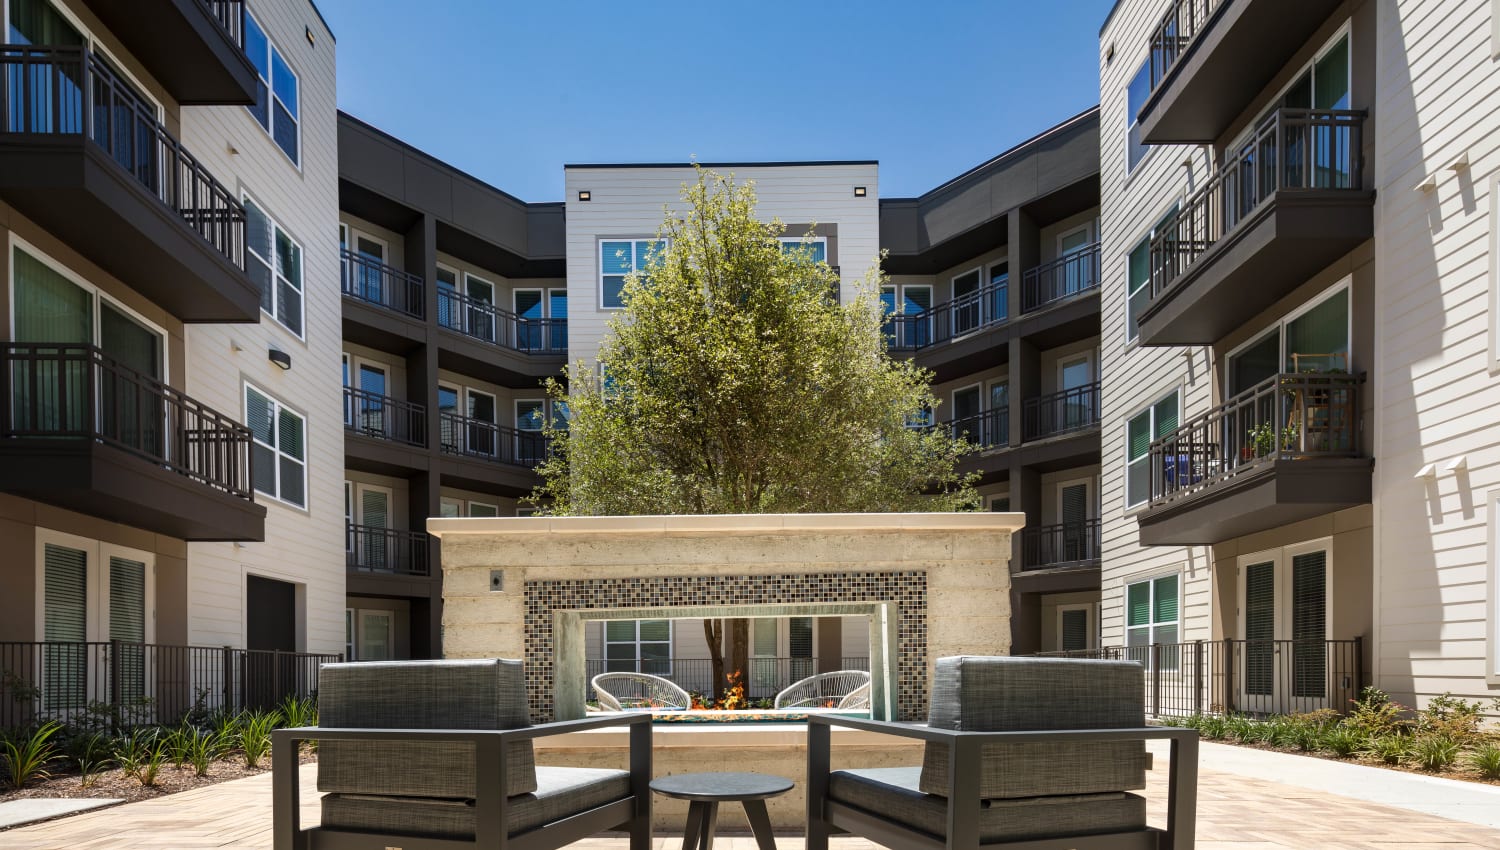 Lounge areas in the exterior courtyard between resident buildings at Lux on Main in Carrollton, Texas